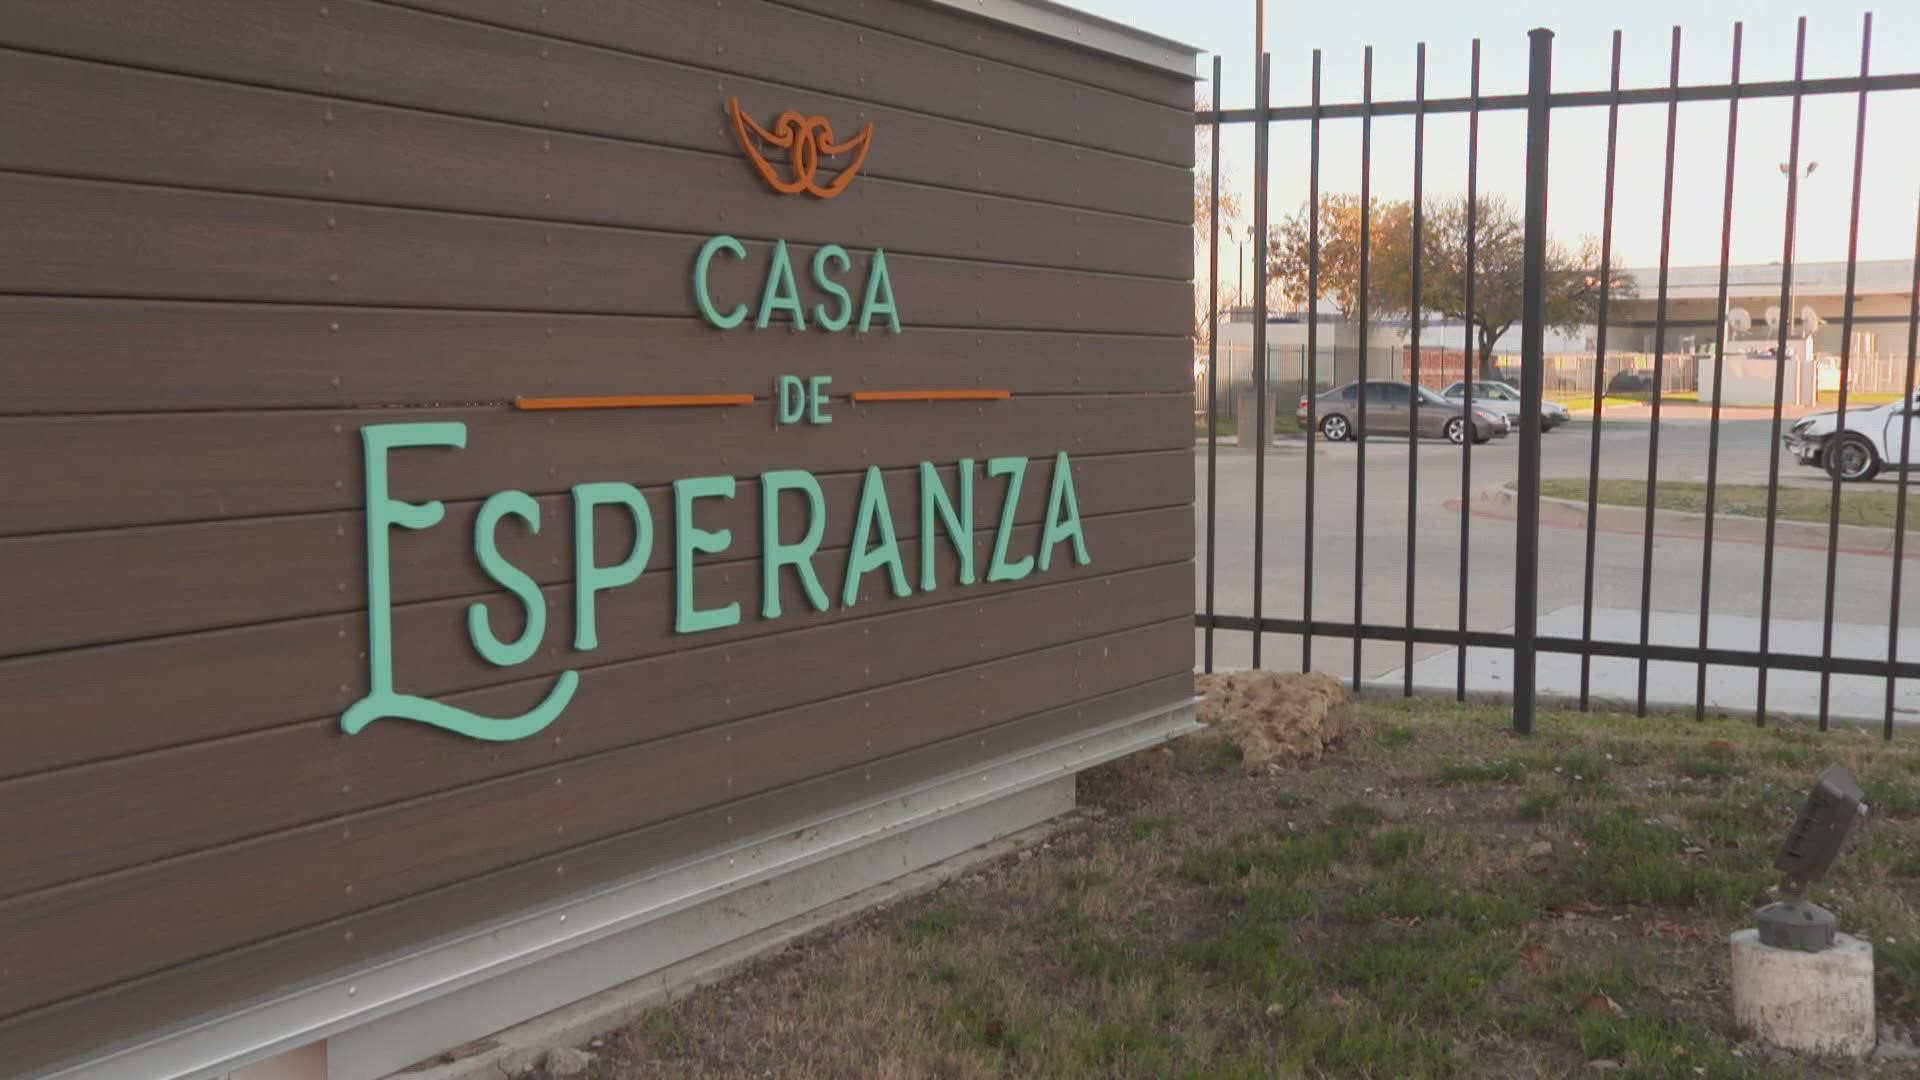 Fort Worth city officials believe they're close to ending chronic homelessness and have plans to create a second version of Casa De Esperanza.